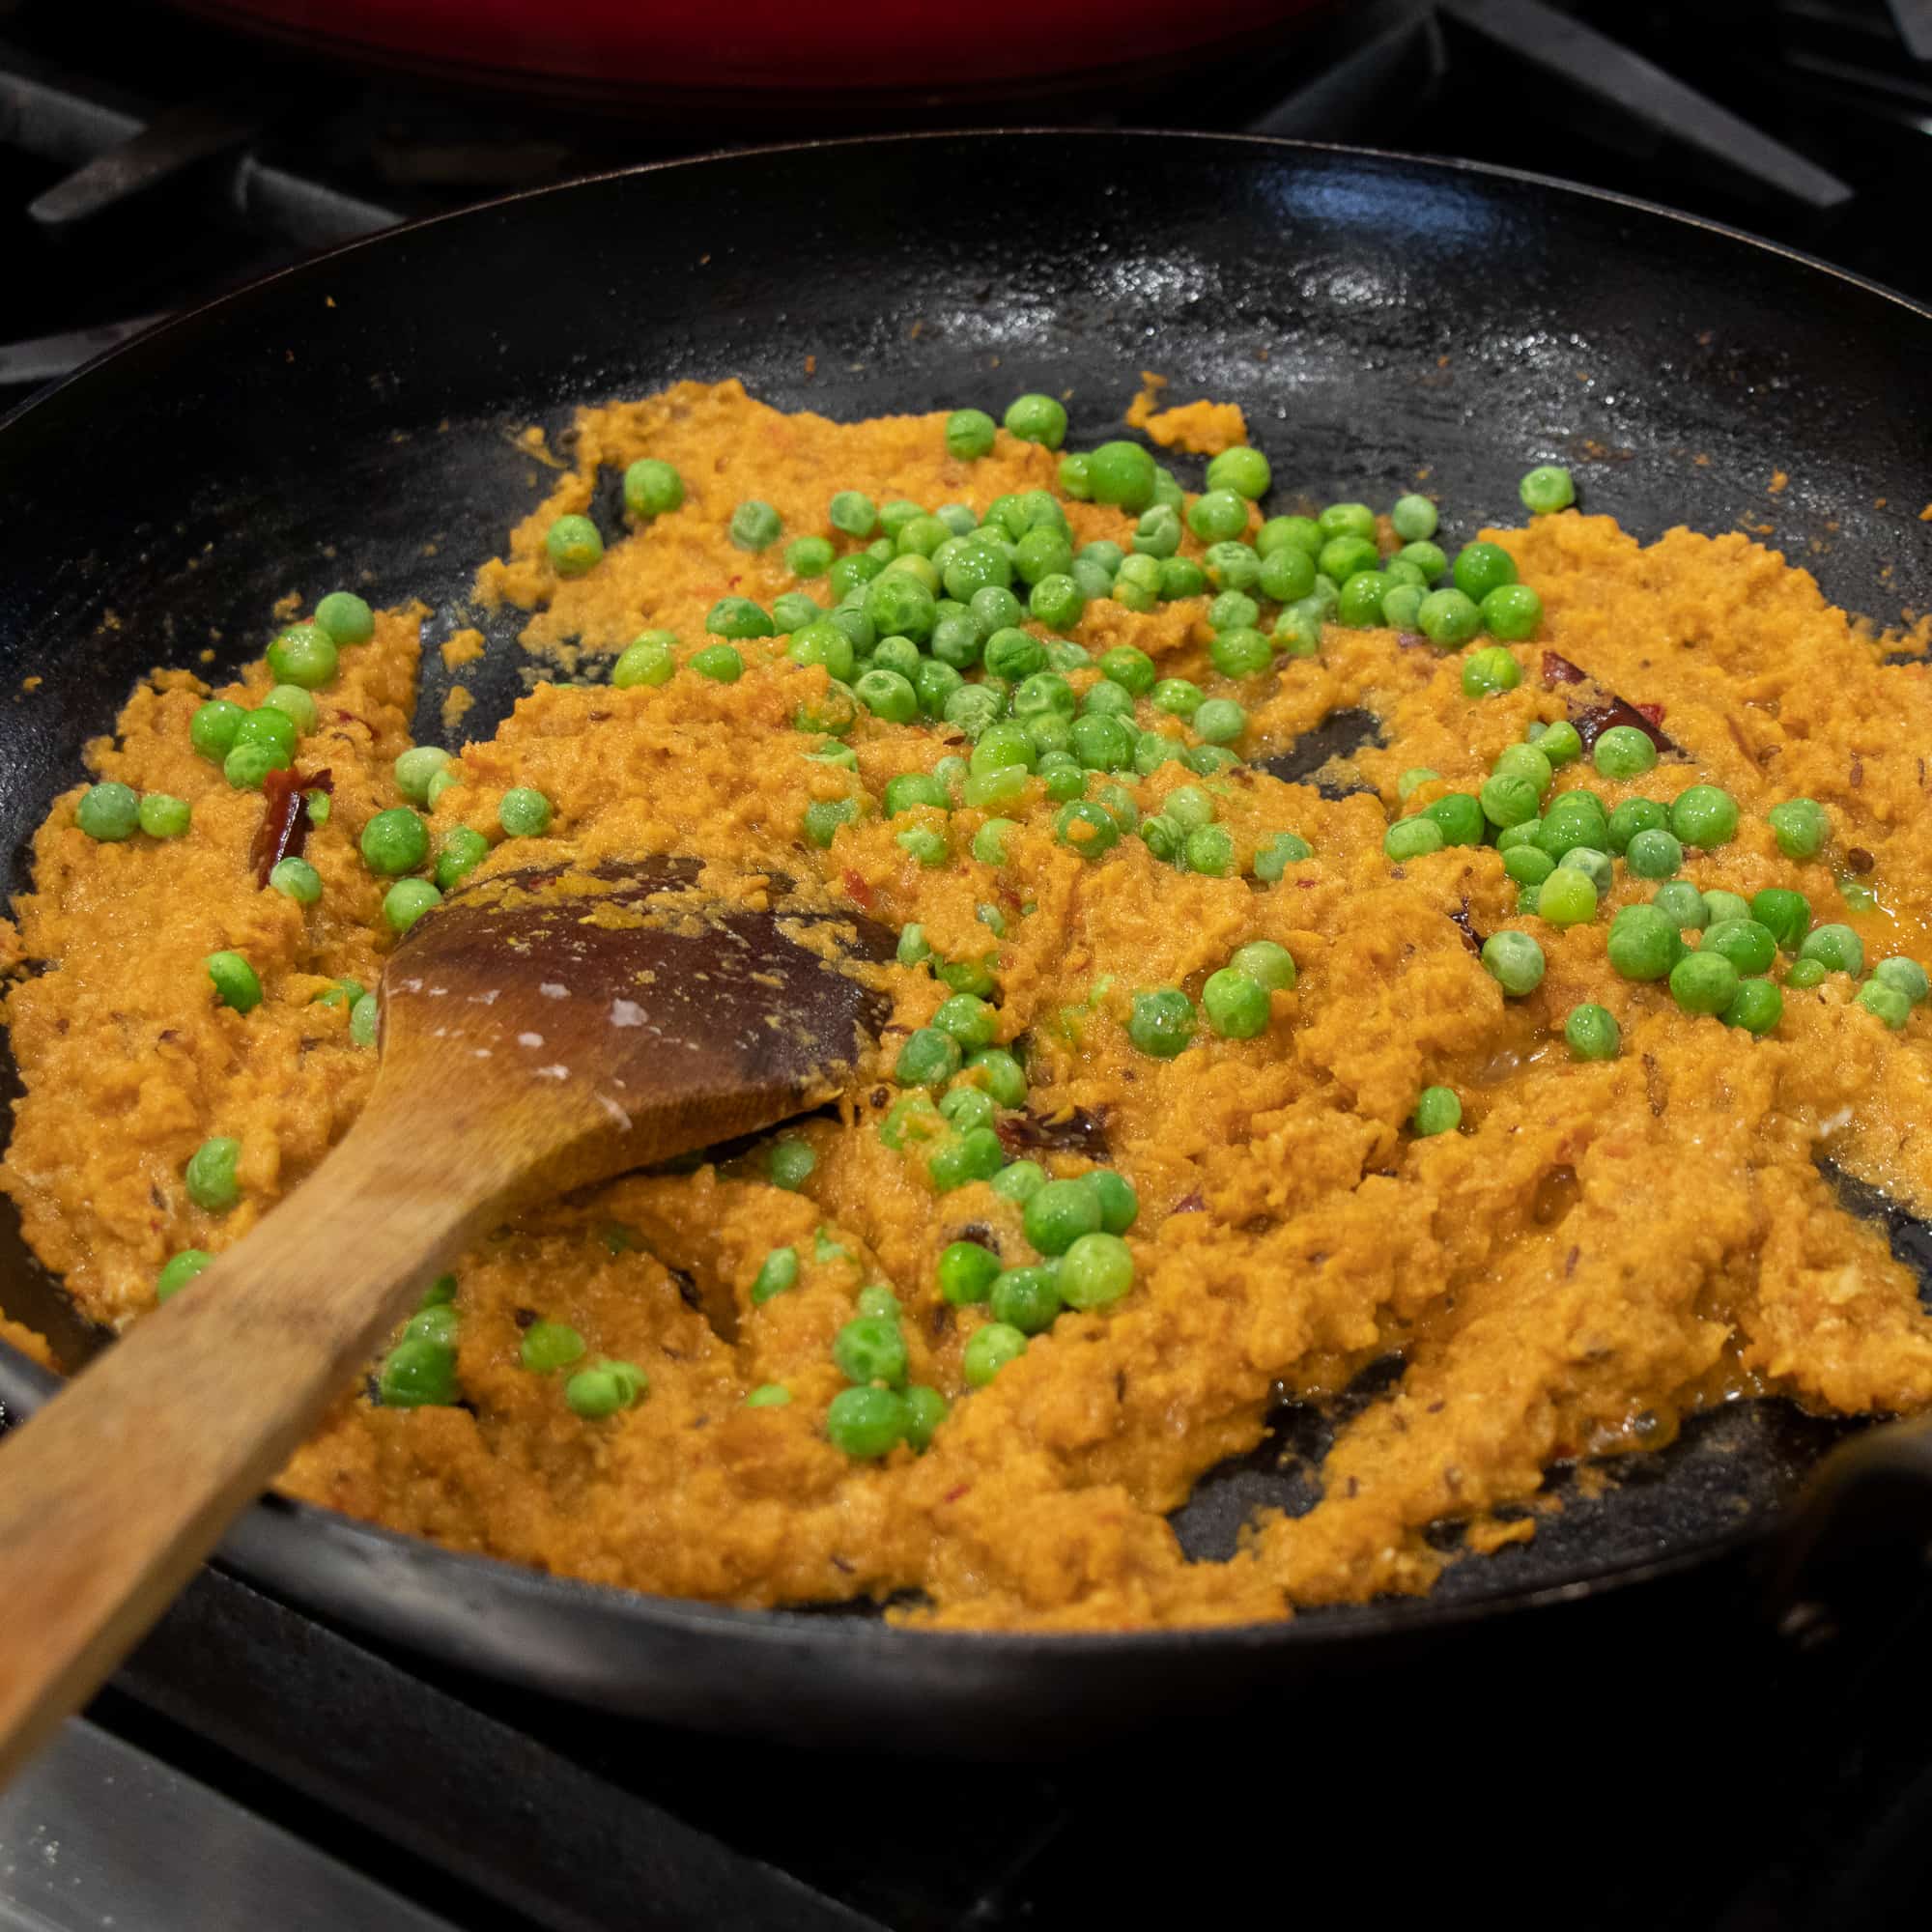 Add the frozen peas to the cooked onions and spices